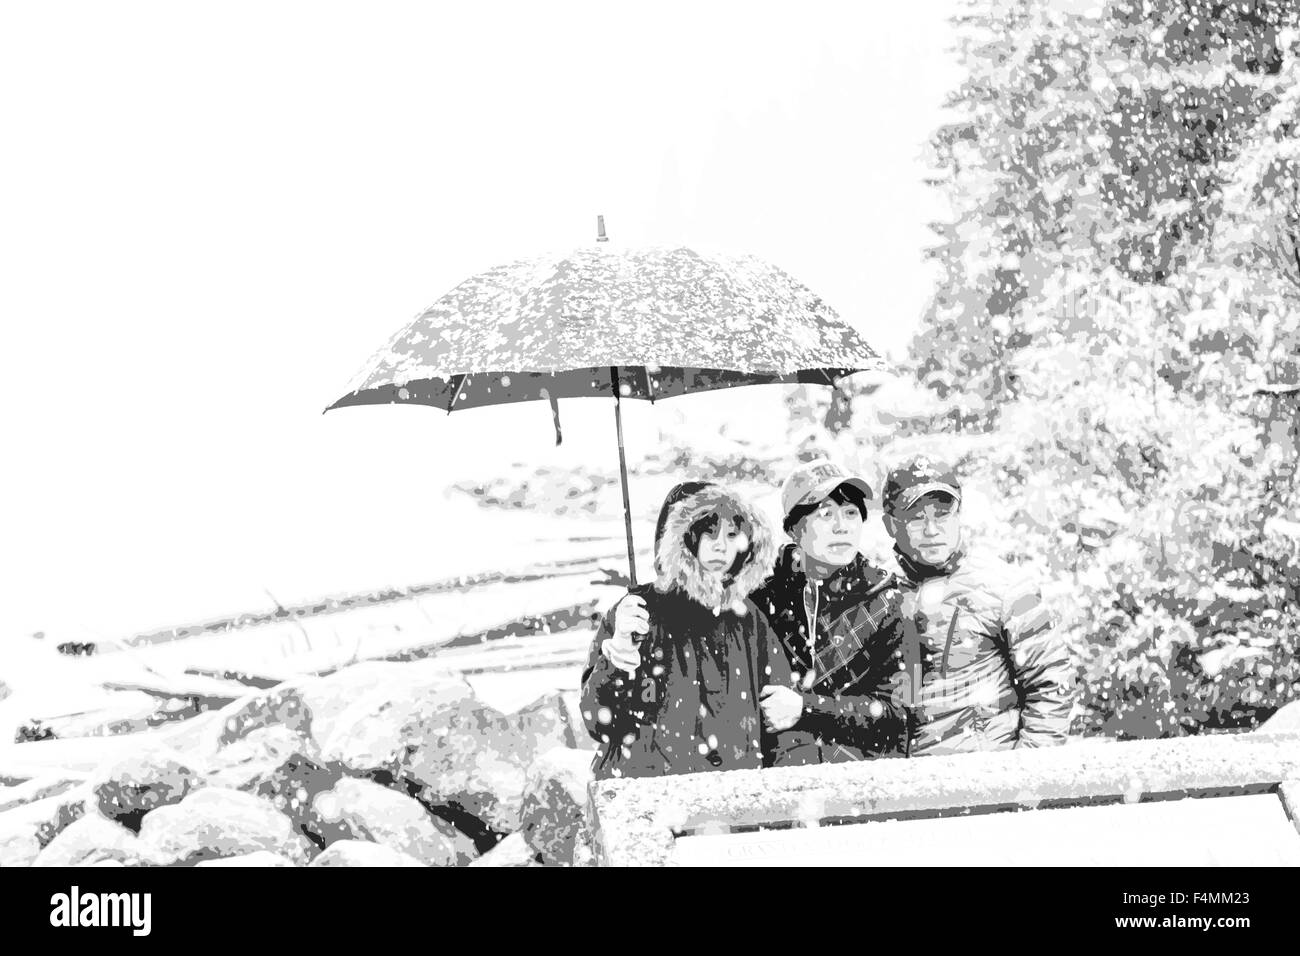 Snow in September and tourists shelter under an umbrella at Moraine Lake, Banff National Park, Rocky Mountains, Alberta, Canada. Stock Photo